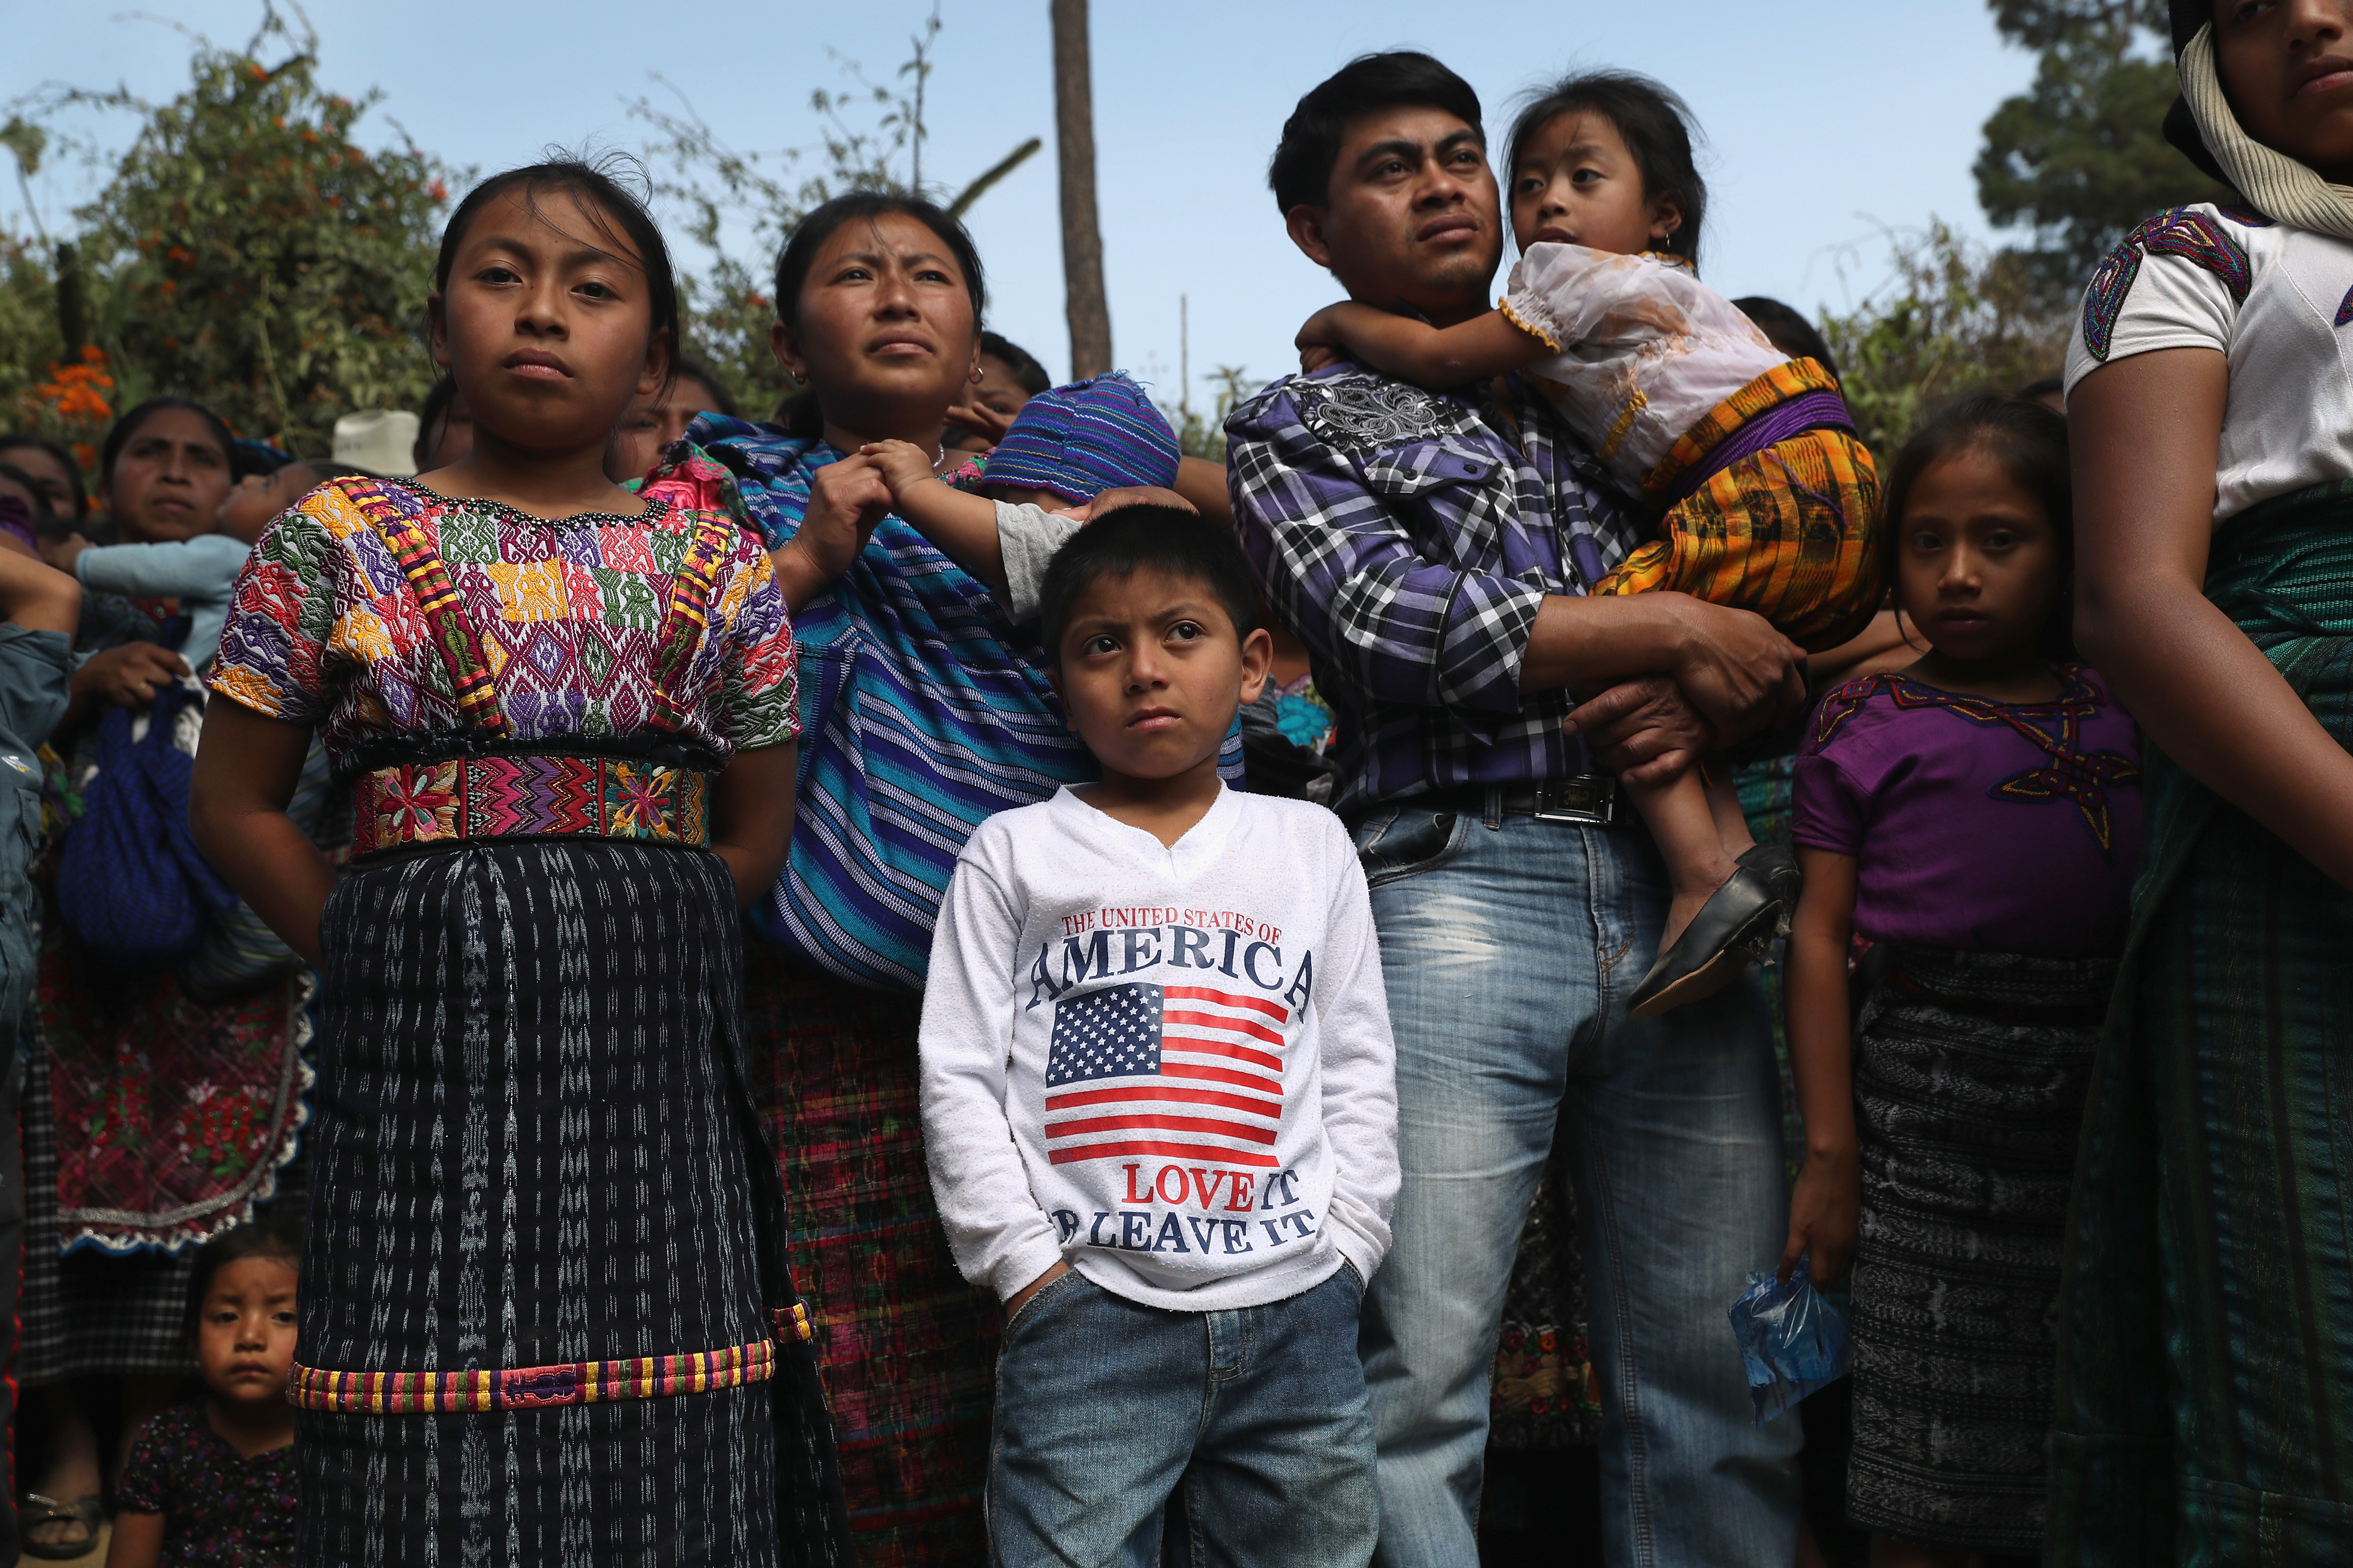 Families attend a memorial service for two boys who were kidnapped and killed in San Juan Sacatepequez, Guatemala on Feb. 14, 2017. More than 2,000 people walked in a funeral procession for Oscar Armando Top Cotzajay, 11, and Carlos Daniel Xiqin, 10 who were abducted walking to school Friday morning when they were abducted. (John Moore—Getty Images)